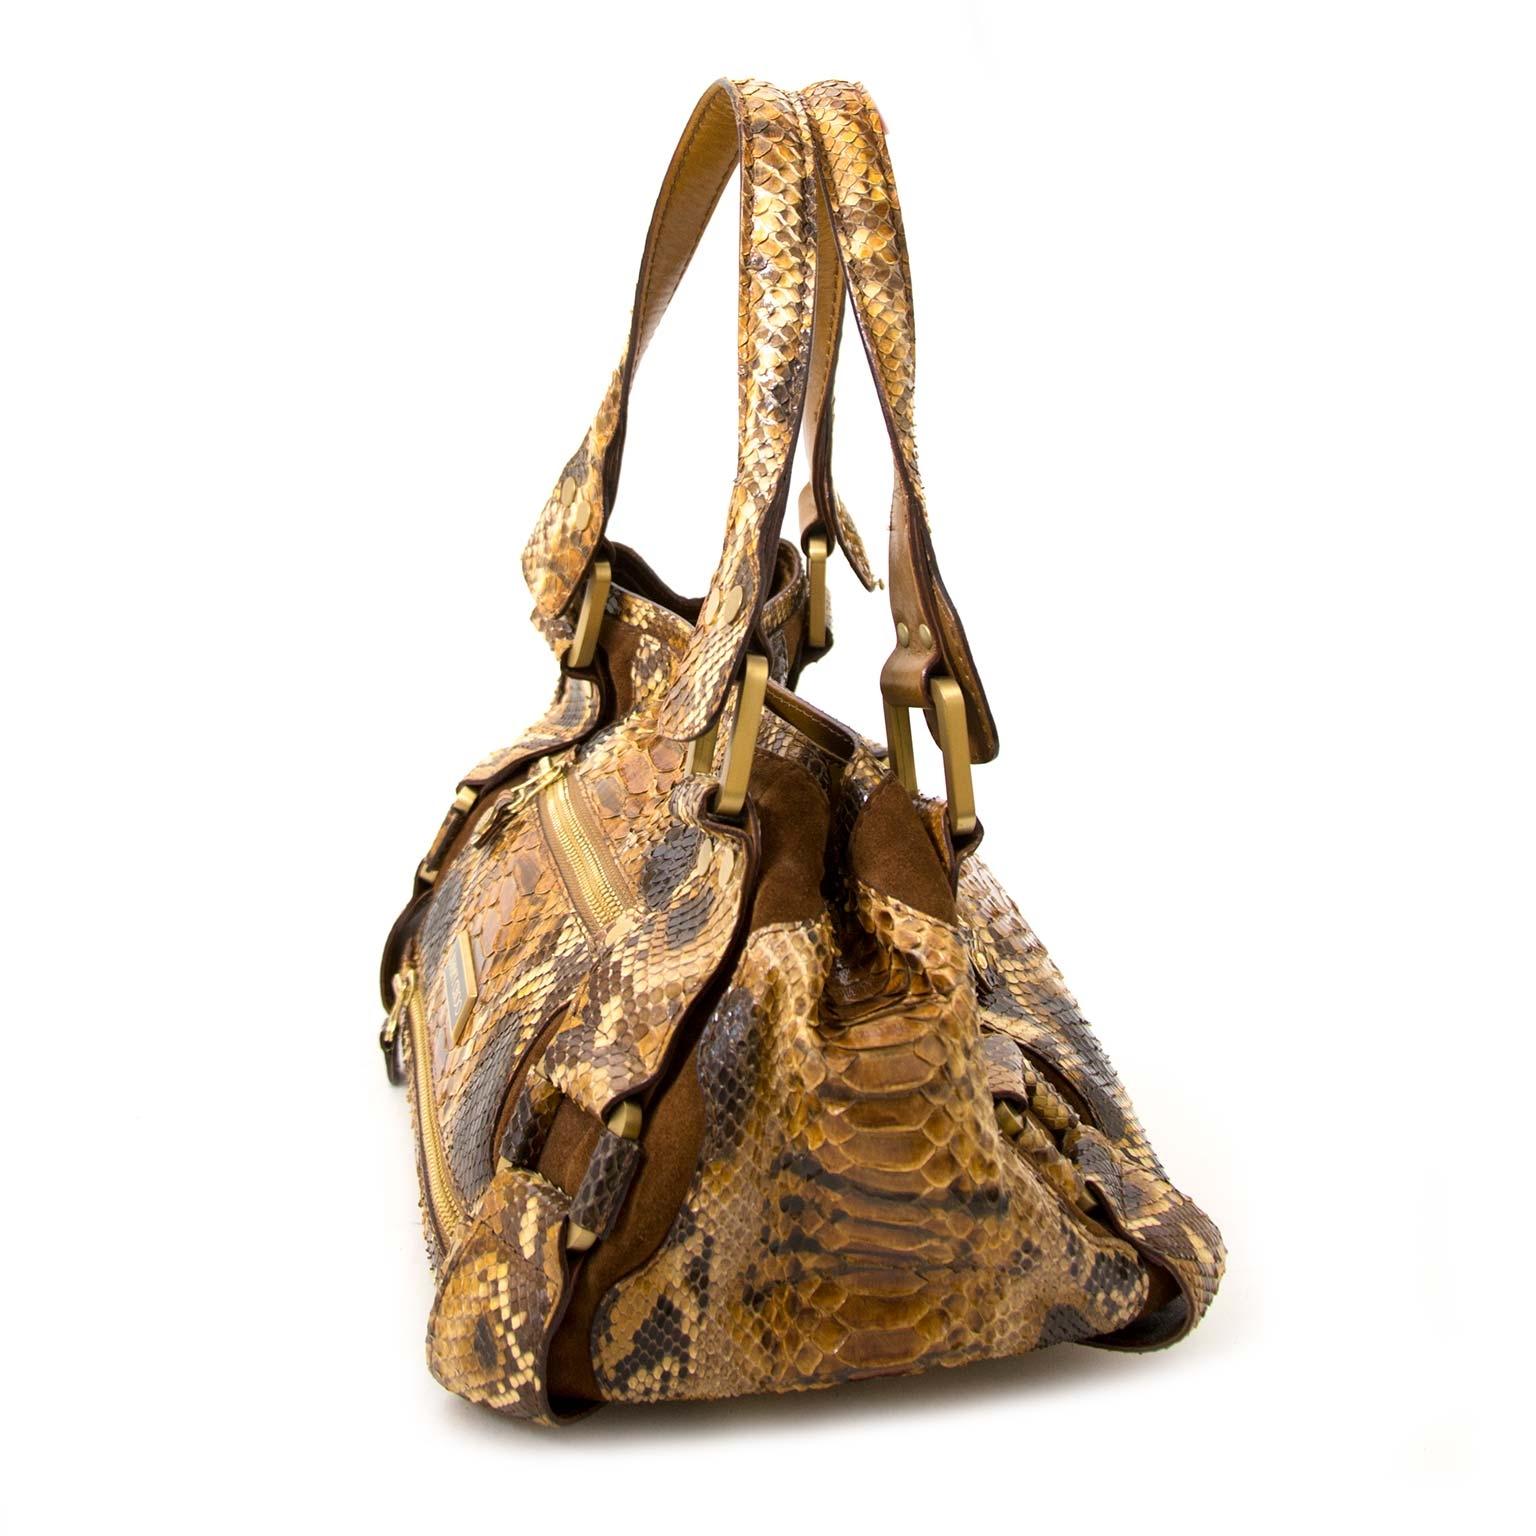 Very good condition

Jimmy Choo Python Brown Bag

If you are looking for a truely unique, beautiful and show-stopping bag, look no further! 

This gorgeous bag by Jimmy Choo is made from brown textured python and features gold-tone metal details.